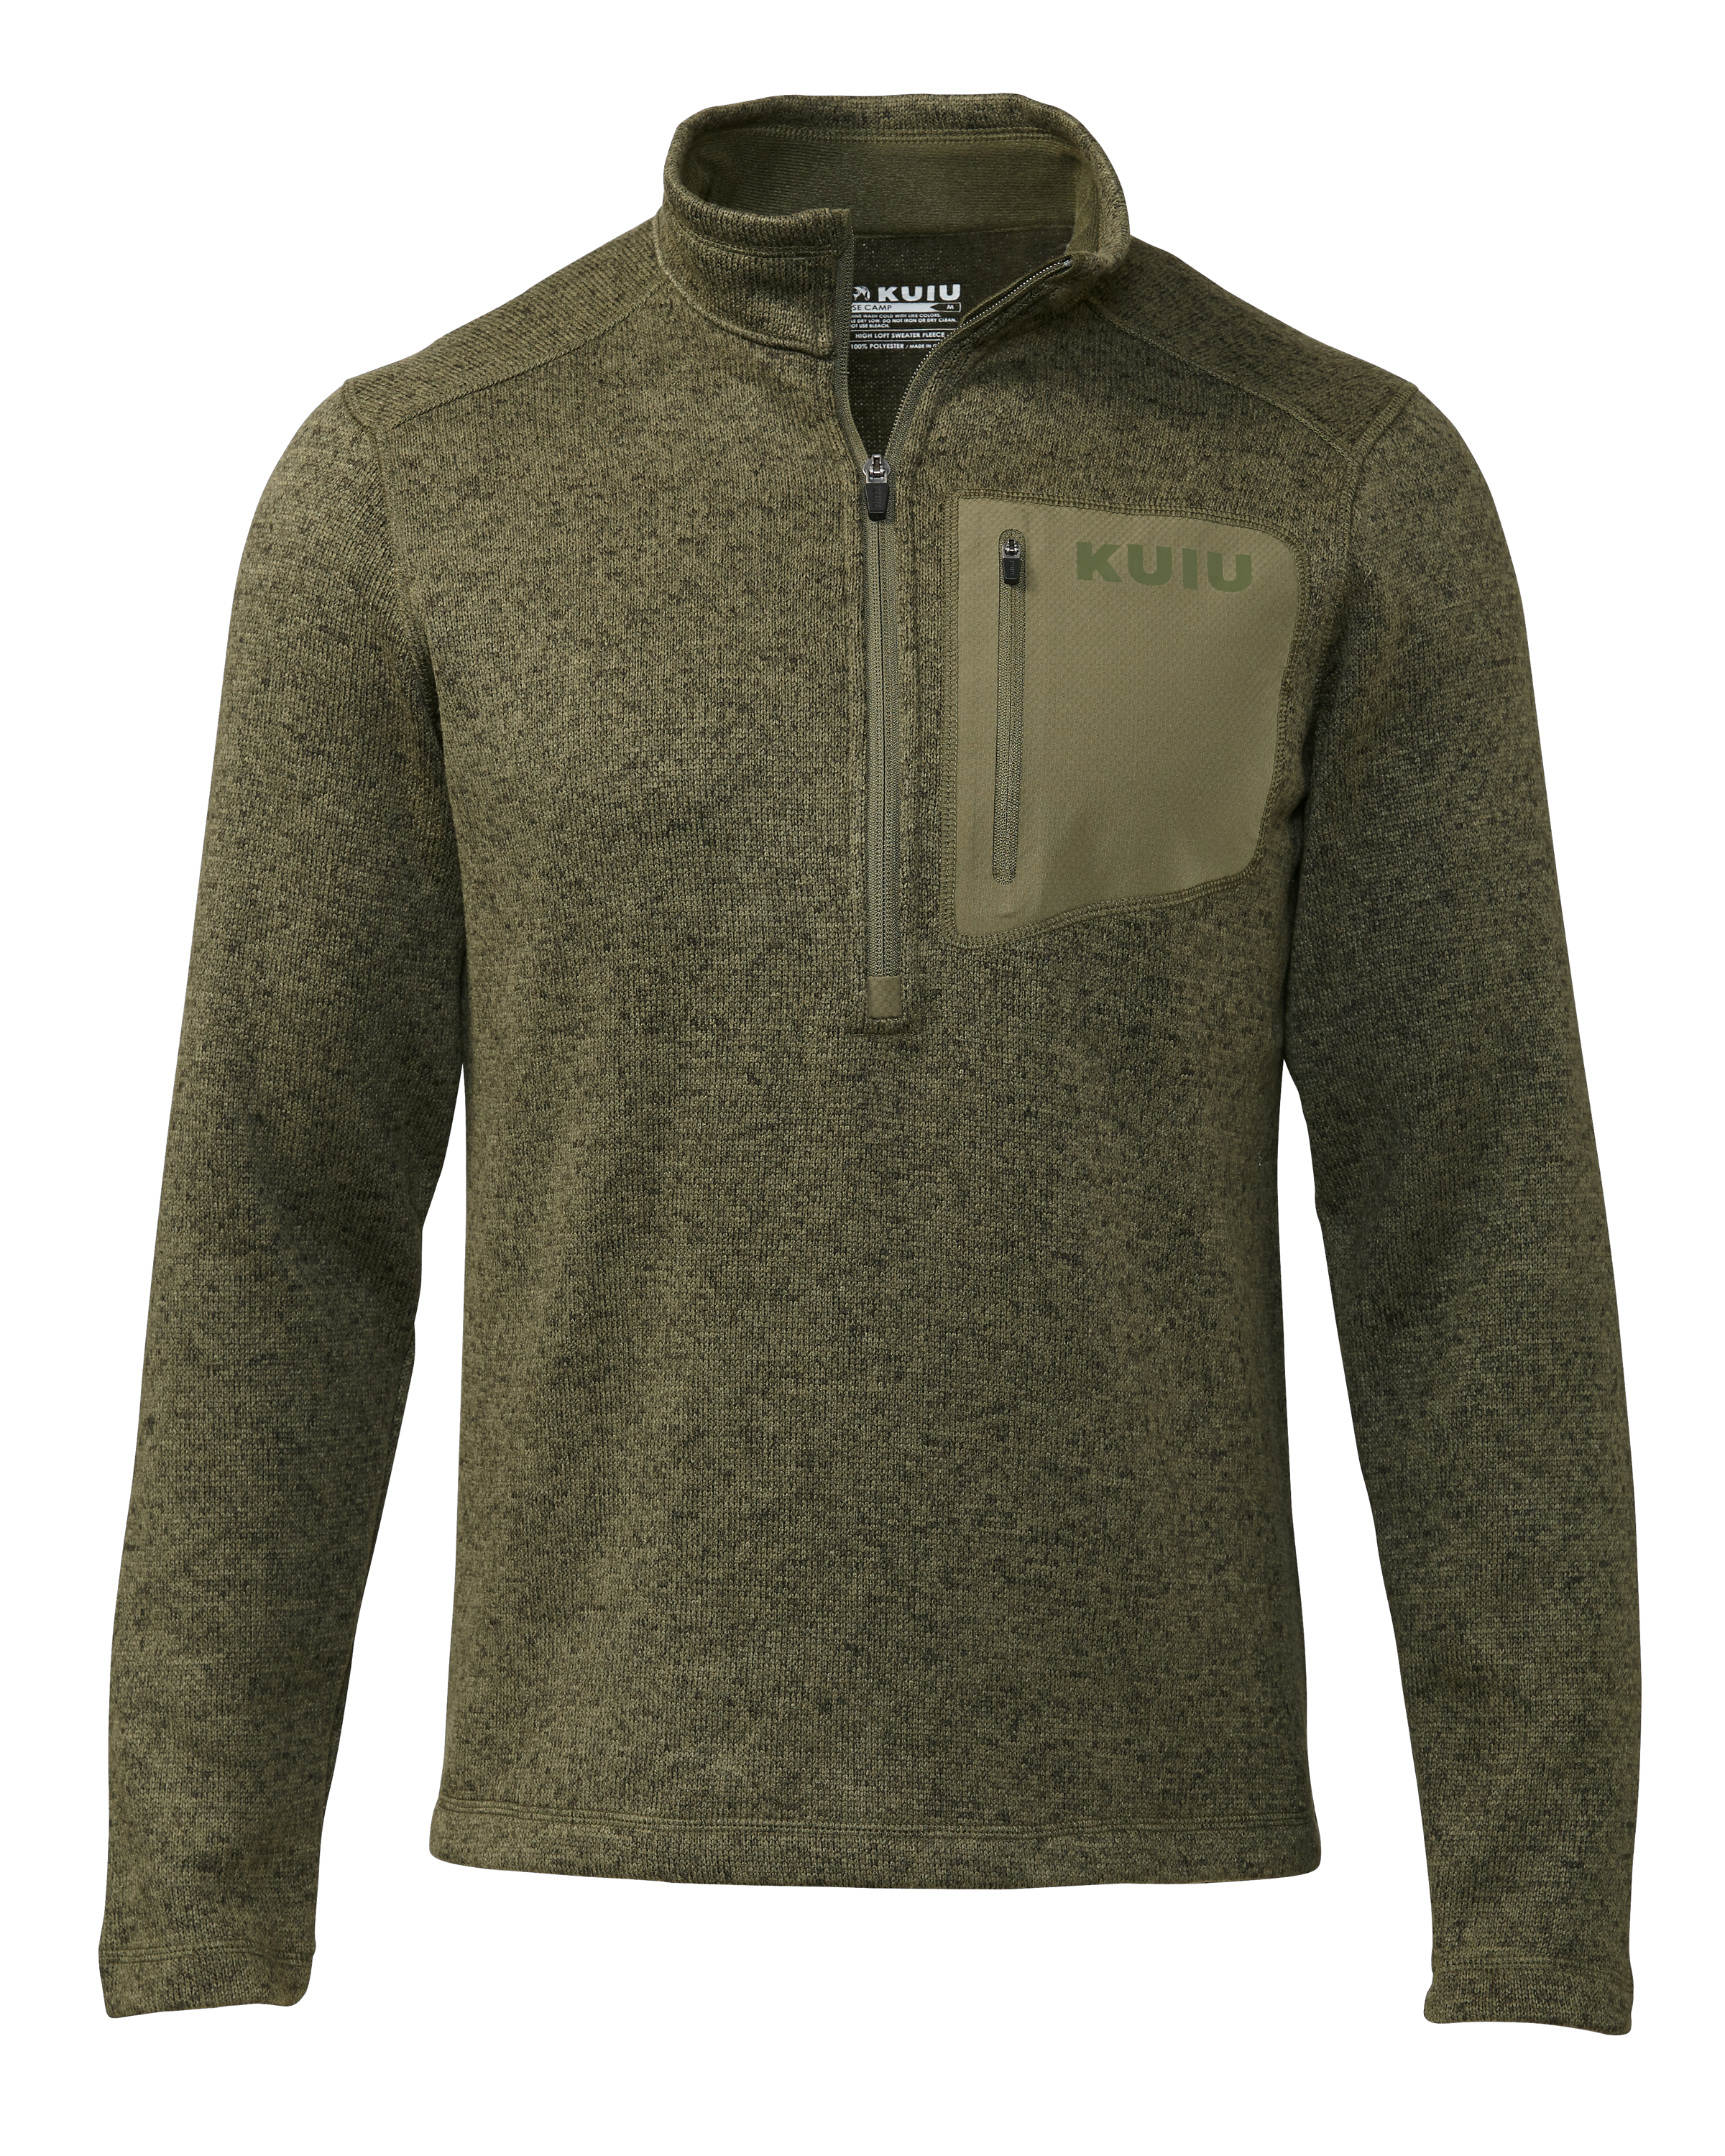 KUIU Outlet Base Camp Pullover Sweater in Olive | Size 2XL